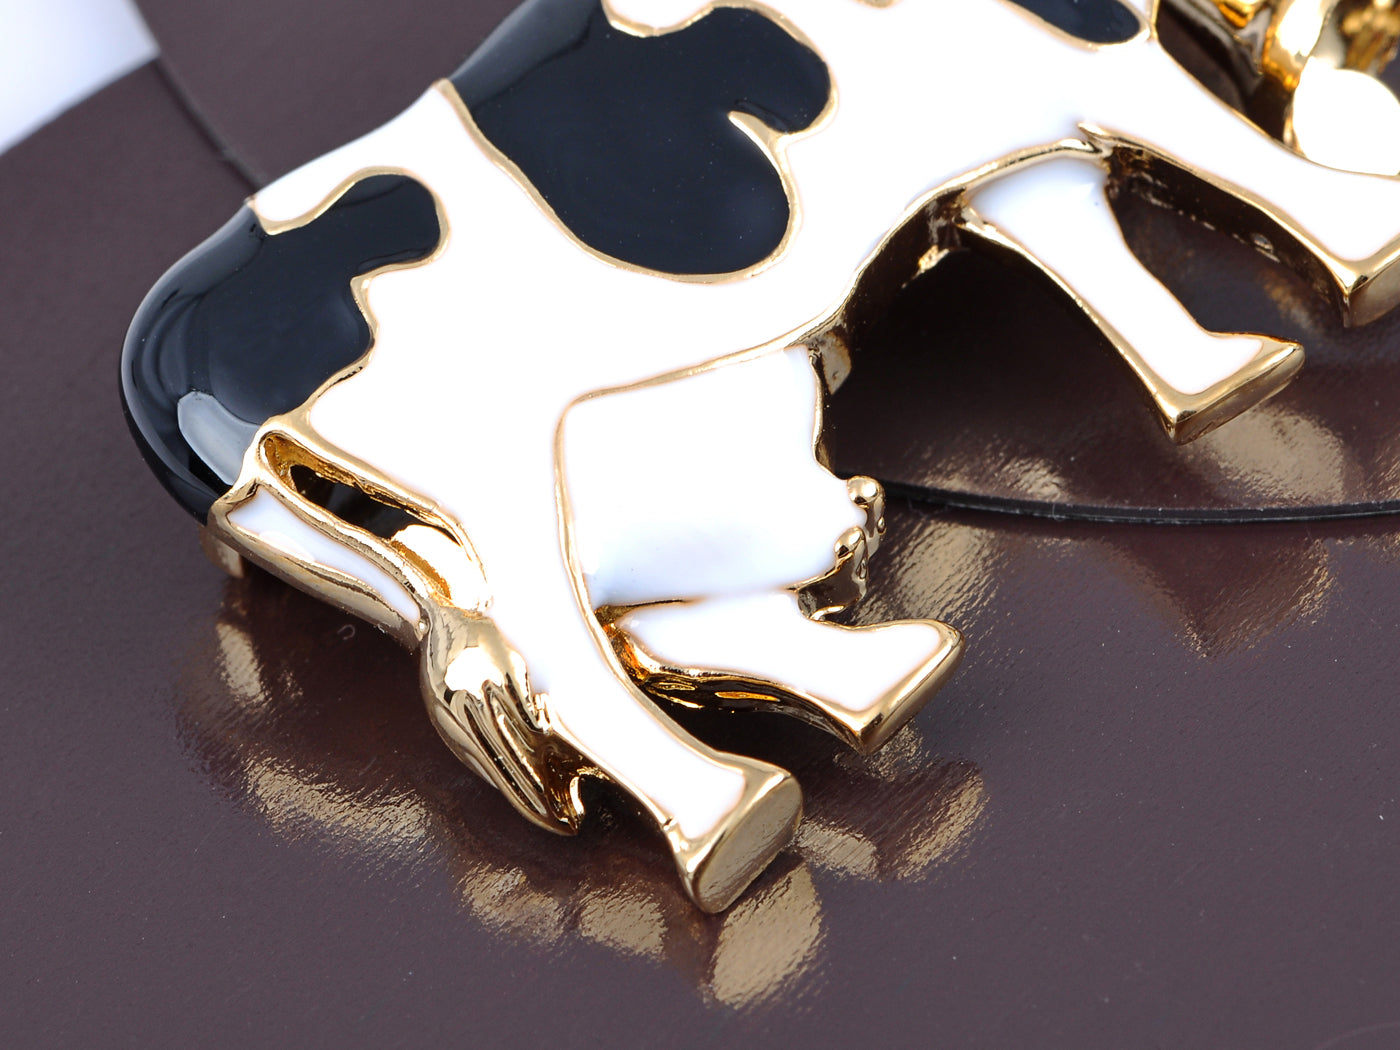 Black White Painted Enamel Farm Animal Cow Bovine Cattle With Bell Brooch Pin